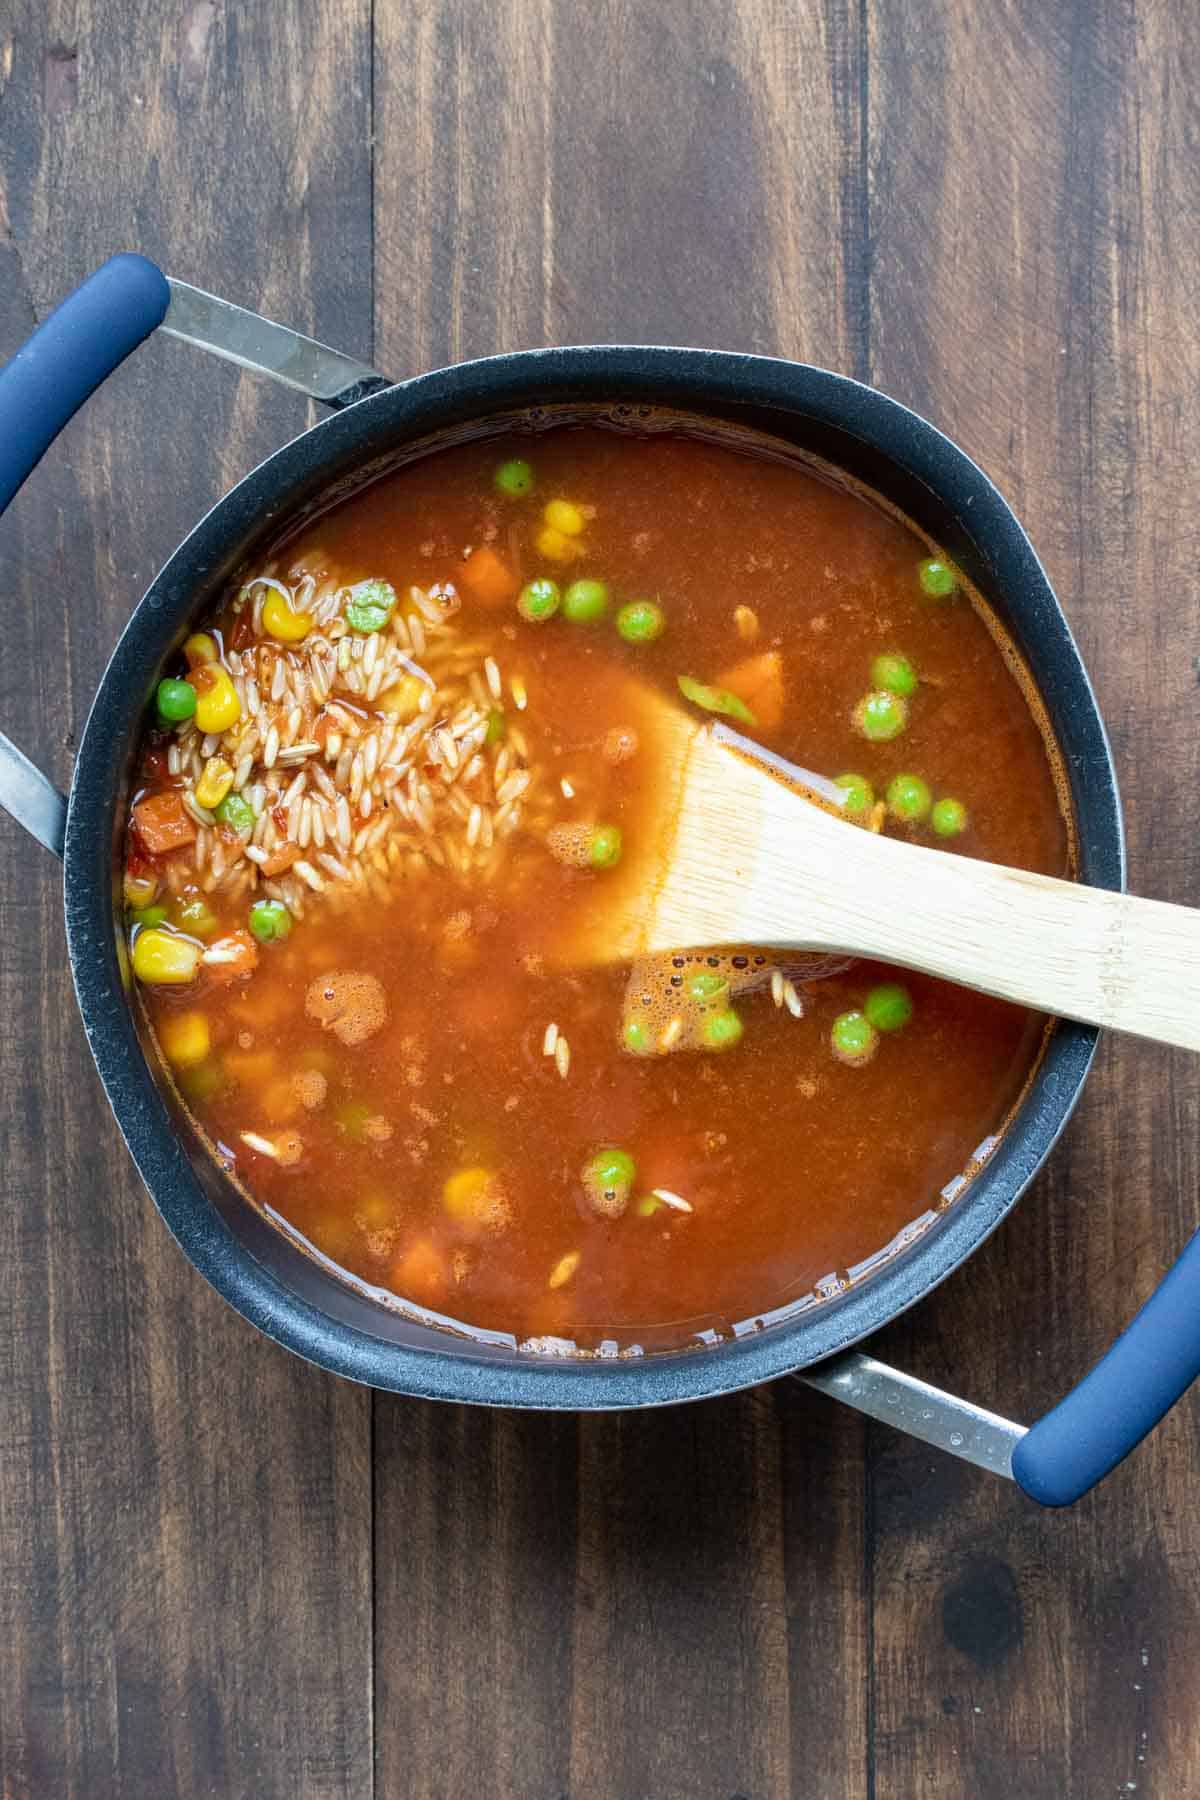 Wooden spoon mixing broth, rice, peas and carrots in a pot